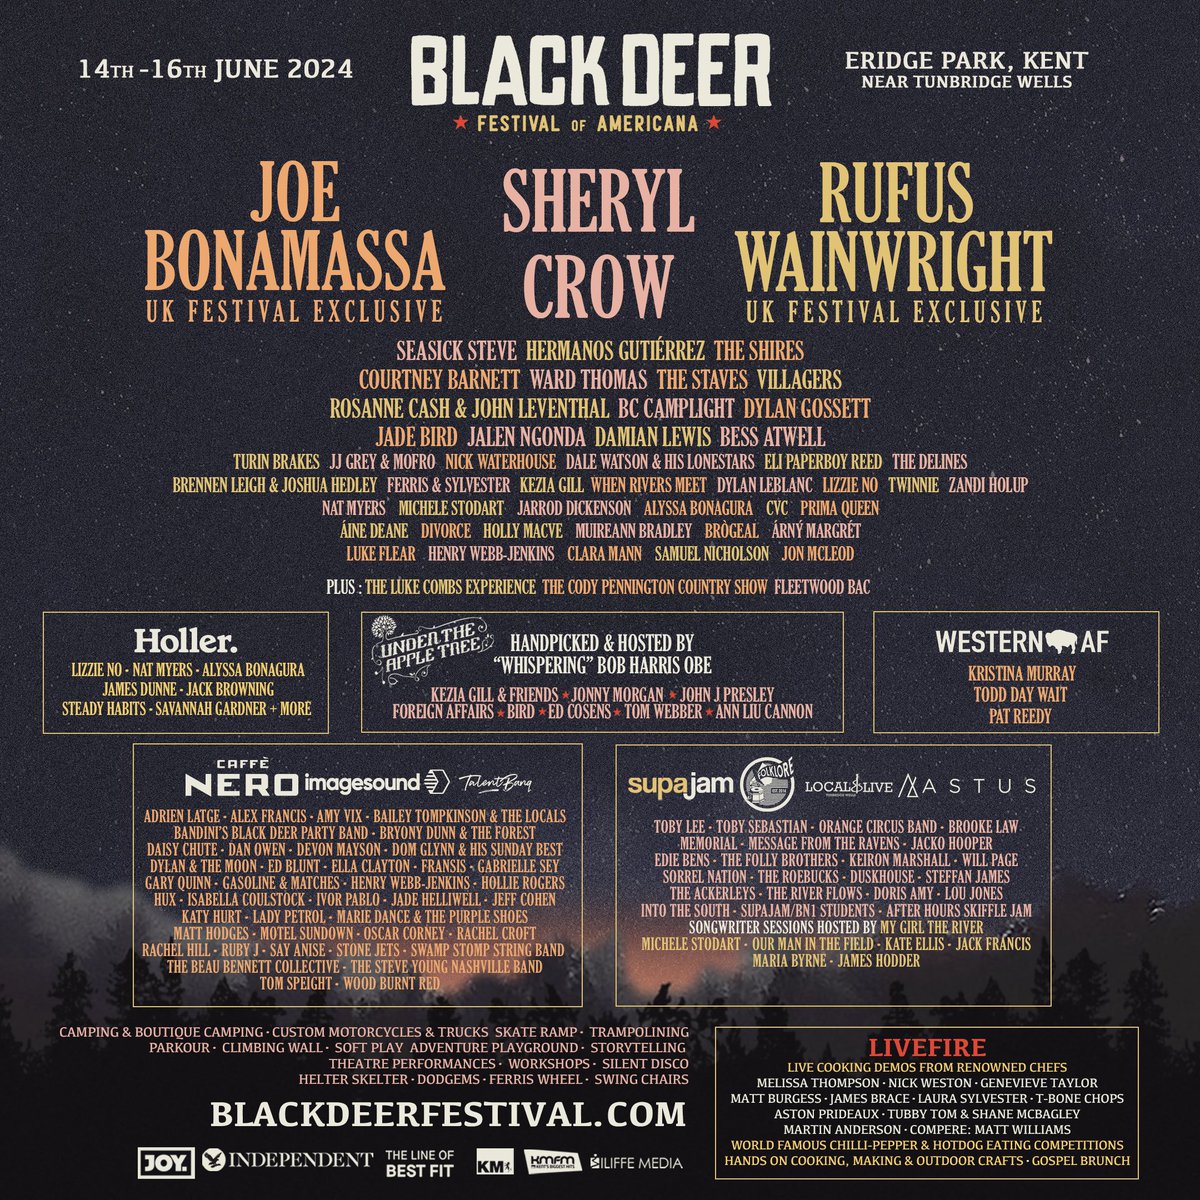 So here it is, and what a beautiful site to behold. Our full 2024 line-up! 🤠

Ft: @JoeBonamassa ★ @SherylCrow ★ @RufusWainwright ★ and an array of 100+ other fantastic artists making waves in the Country, Americana, Folk and Blues circuits!

Tickets: bit.ly/BD2024tickets